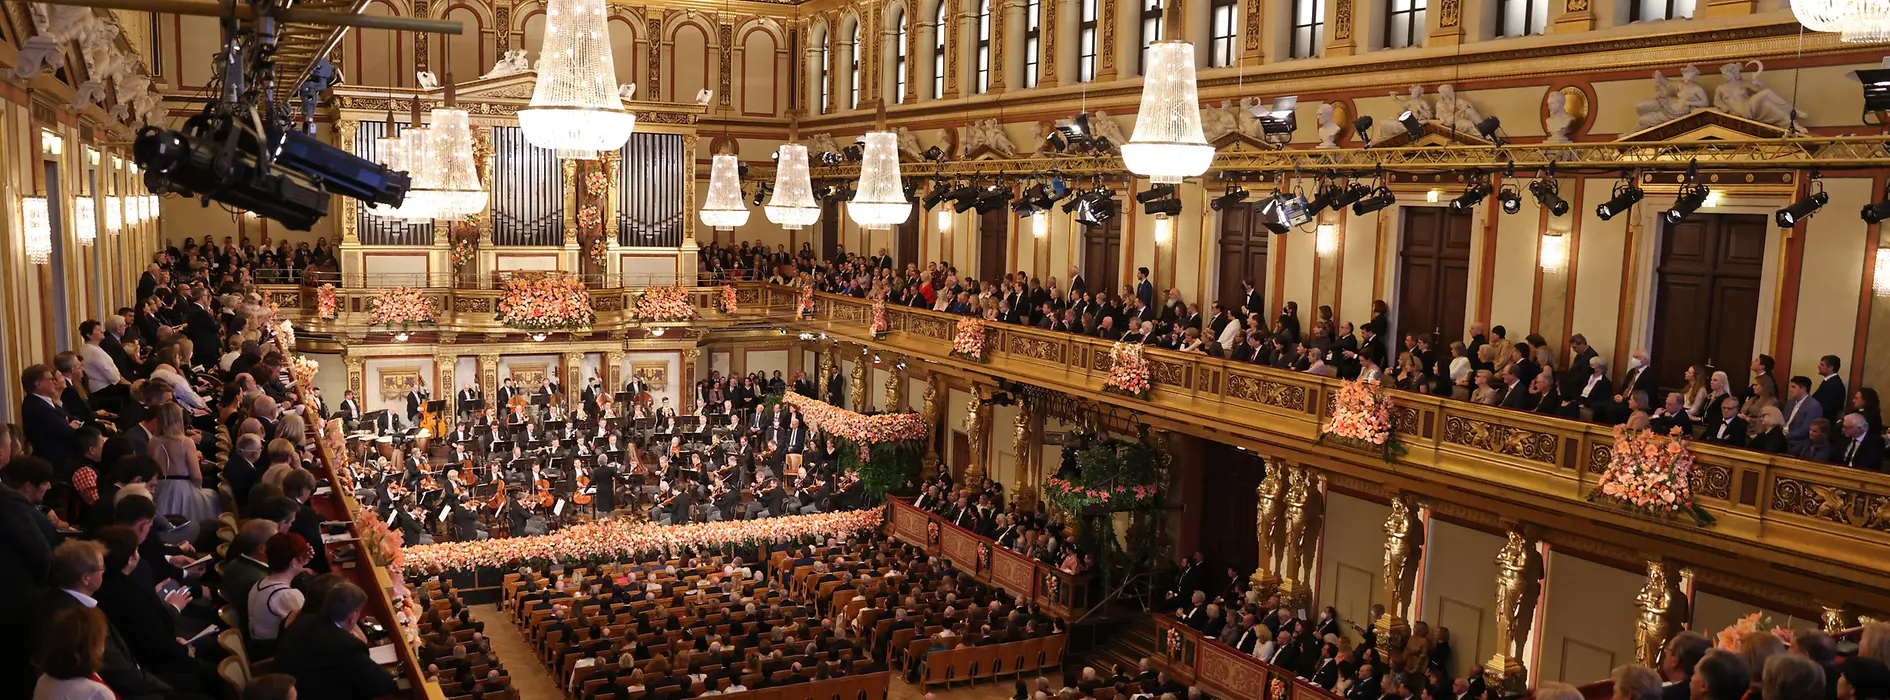 New Year's Concert by the Vienna Philharmonic